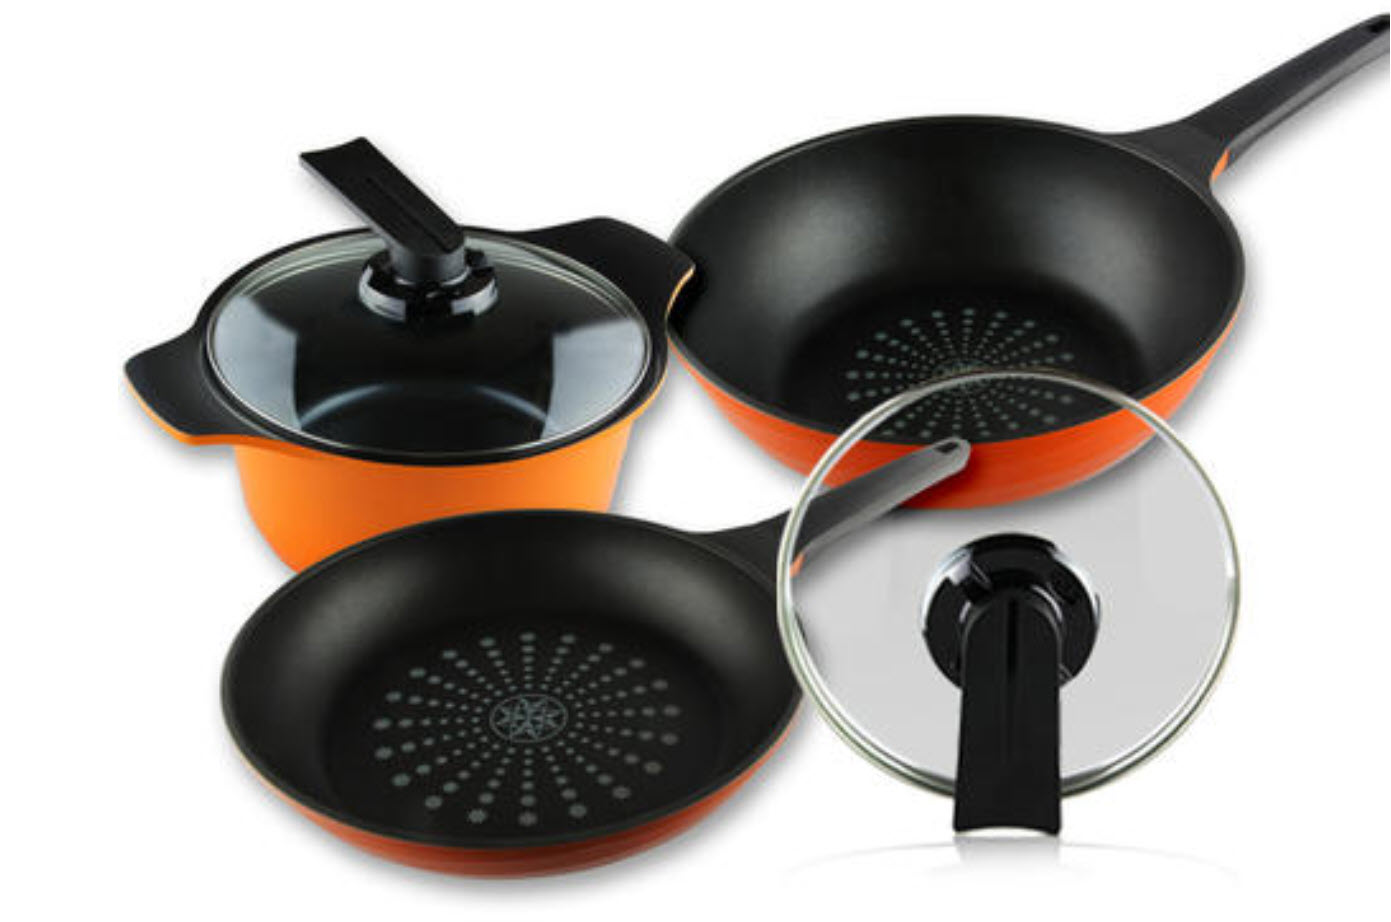 Construction checks and on-site tests for cookware